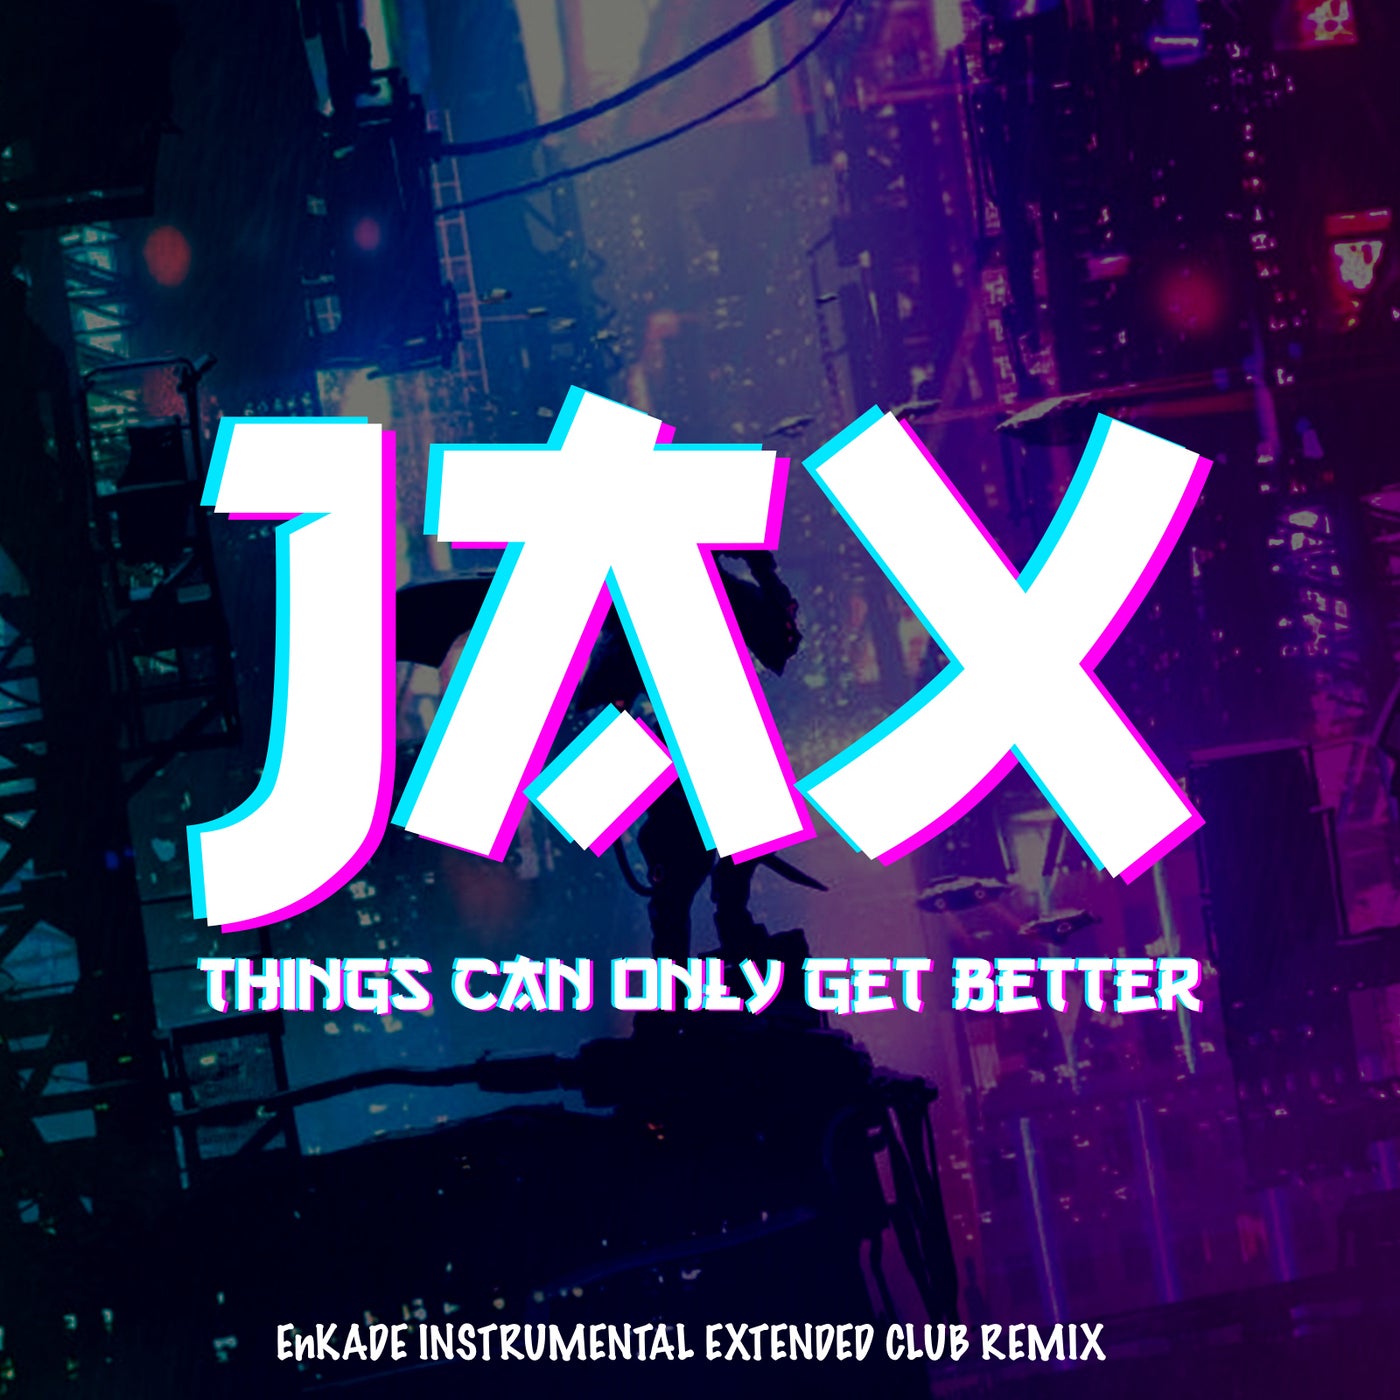 Jax - Things Can Only Get Better (Enkade Instrumental Extended Club Remix) [PM Records]